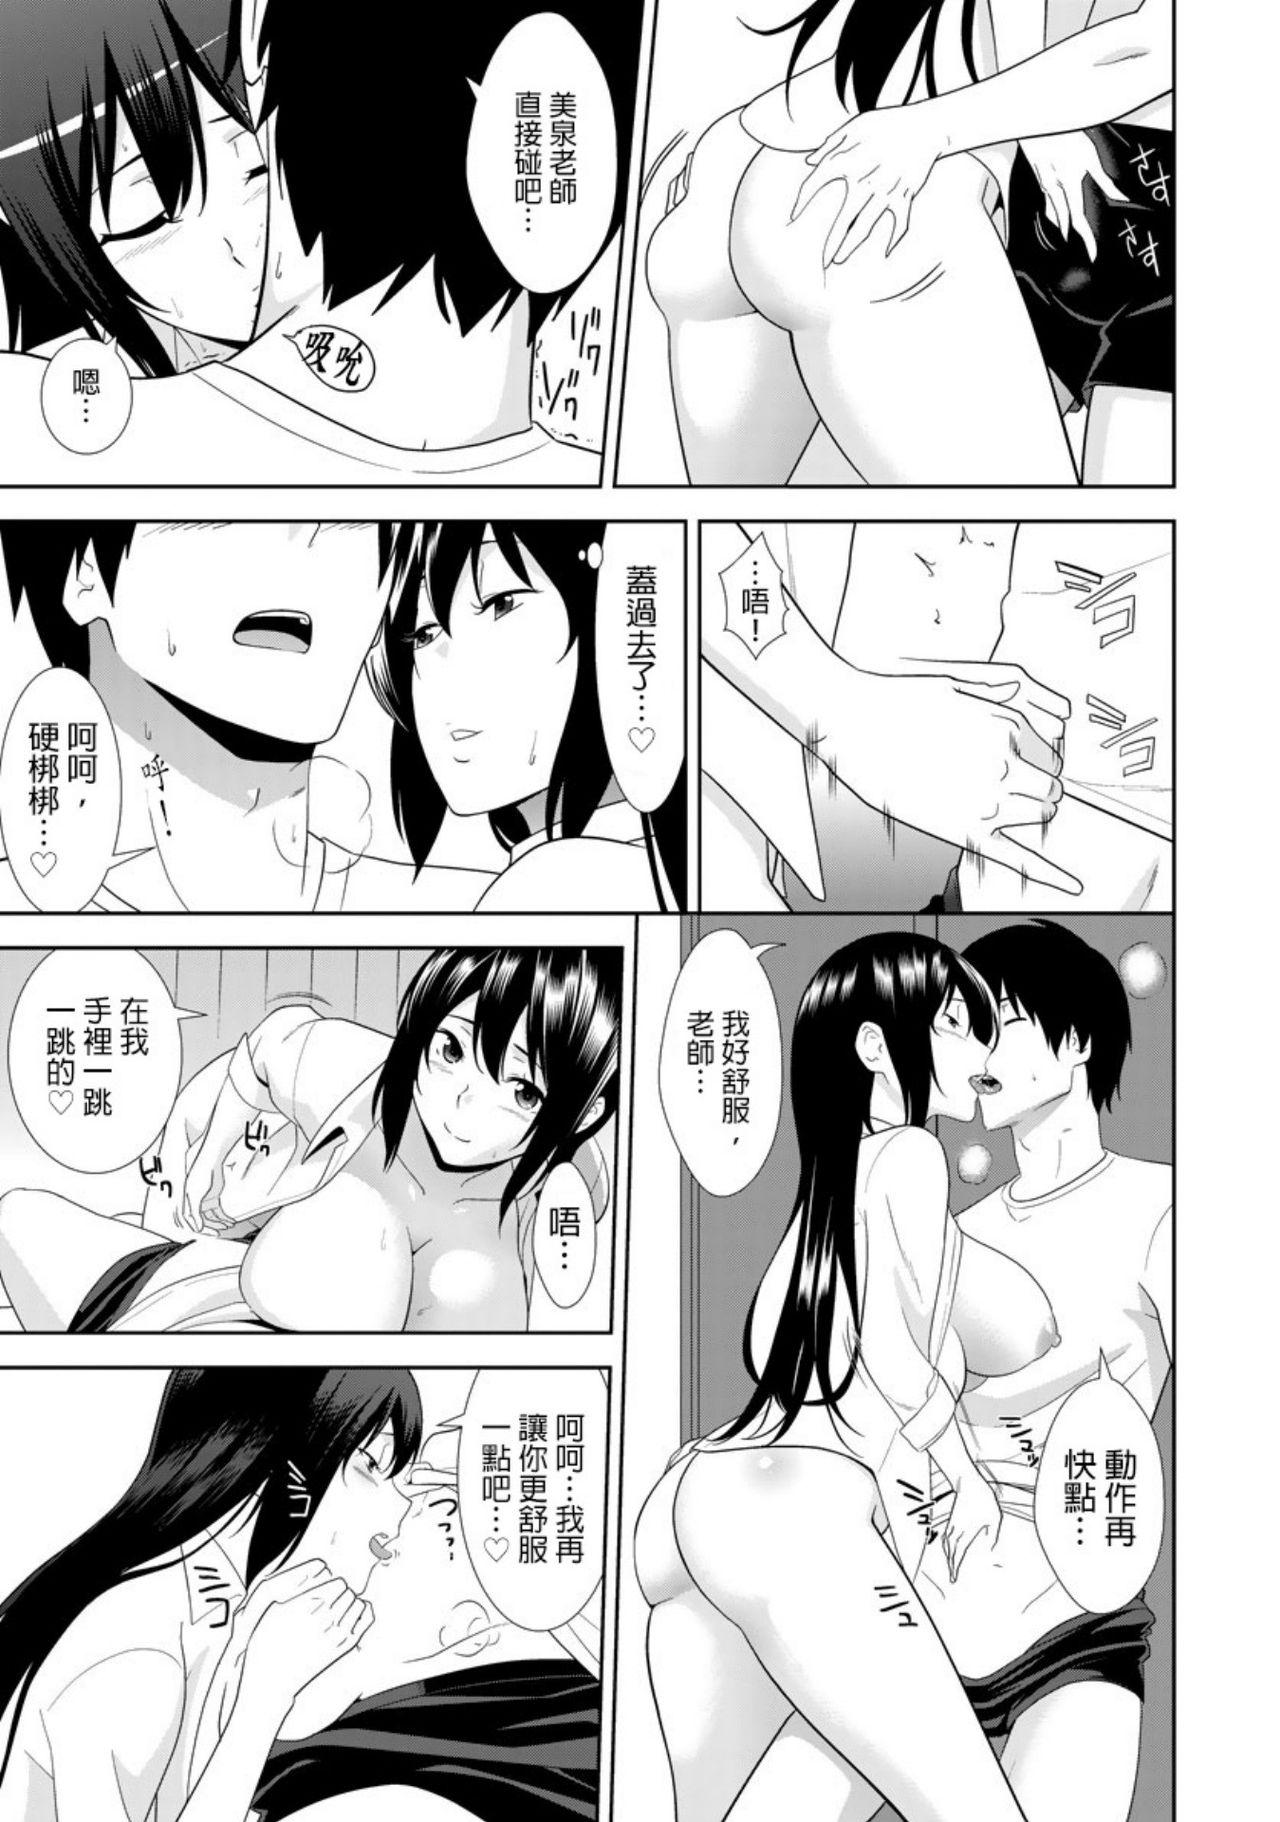 Tits 教え子に襲ワレル人妻は抵抗できなくて Ch.7 Fitness - Page 4